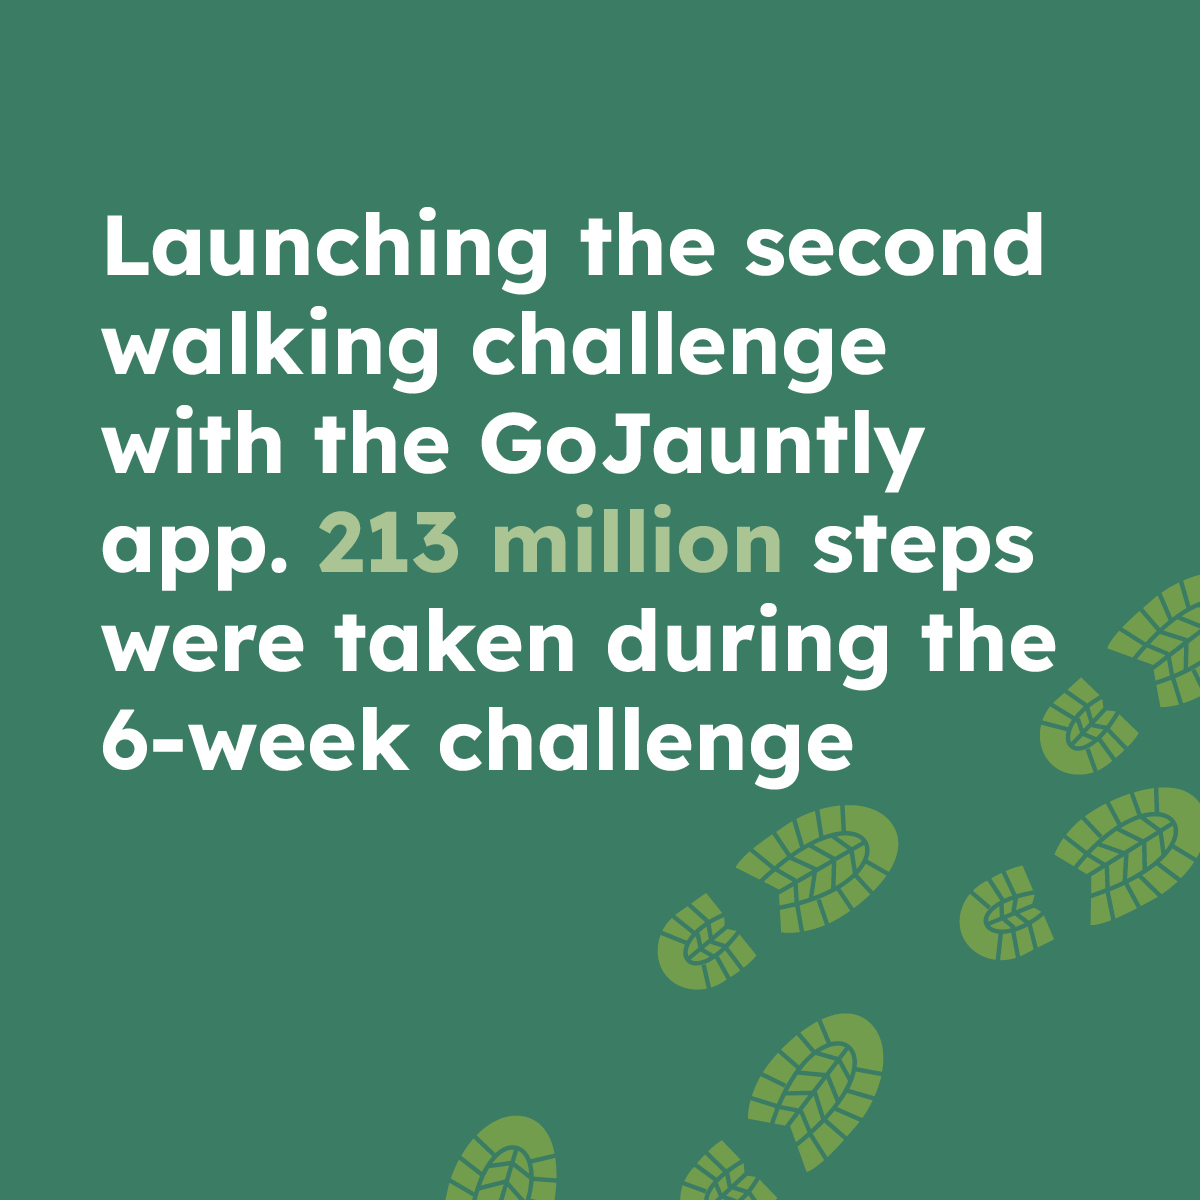 Launched the secong walking challenge with the GoJaunty app. 213 million steps were taken during the 6-week challenge.